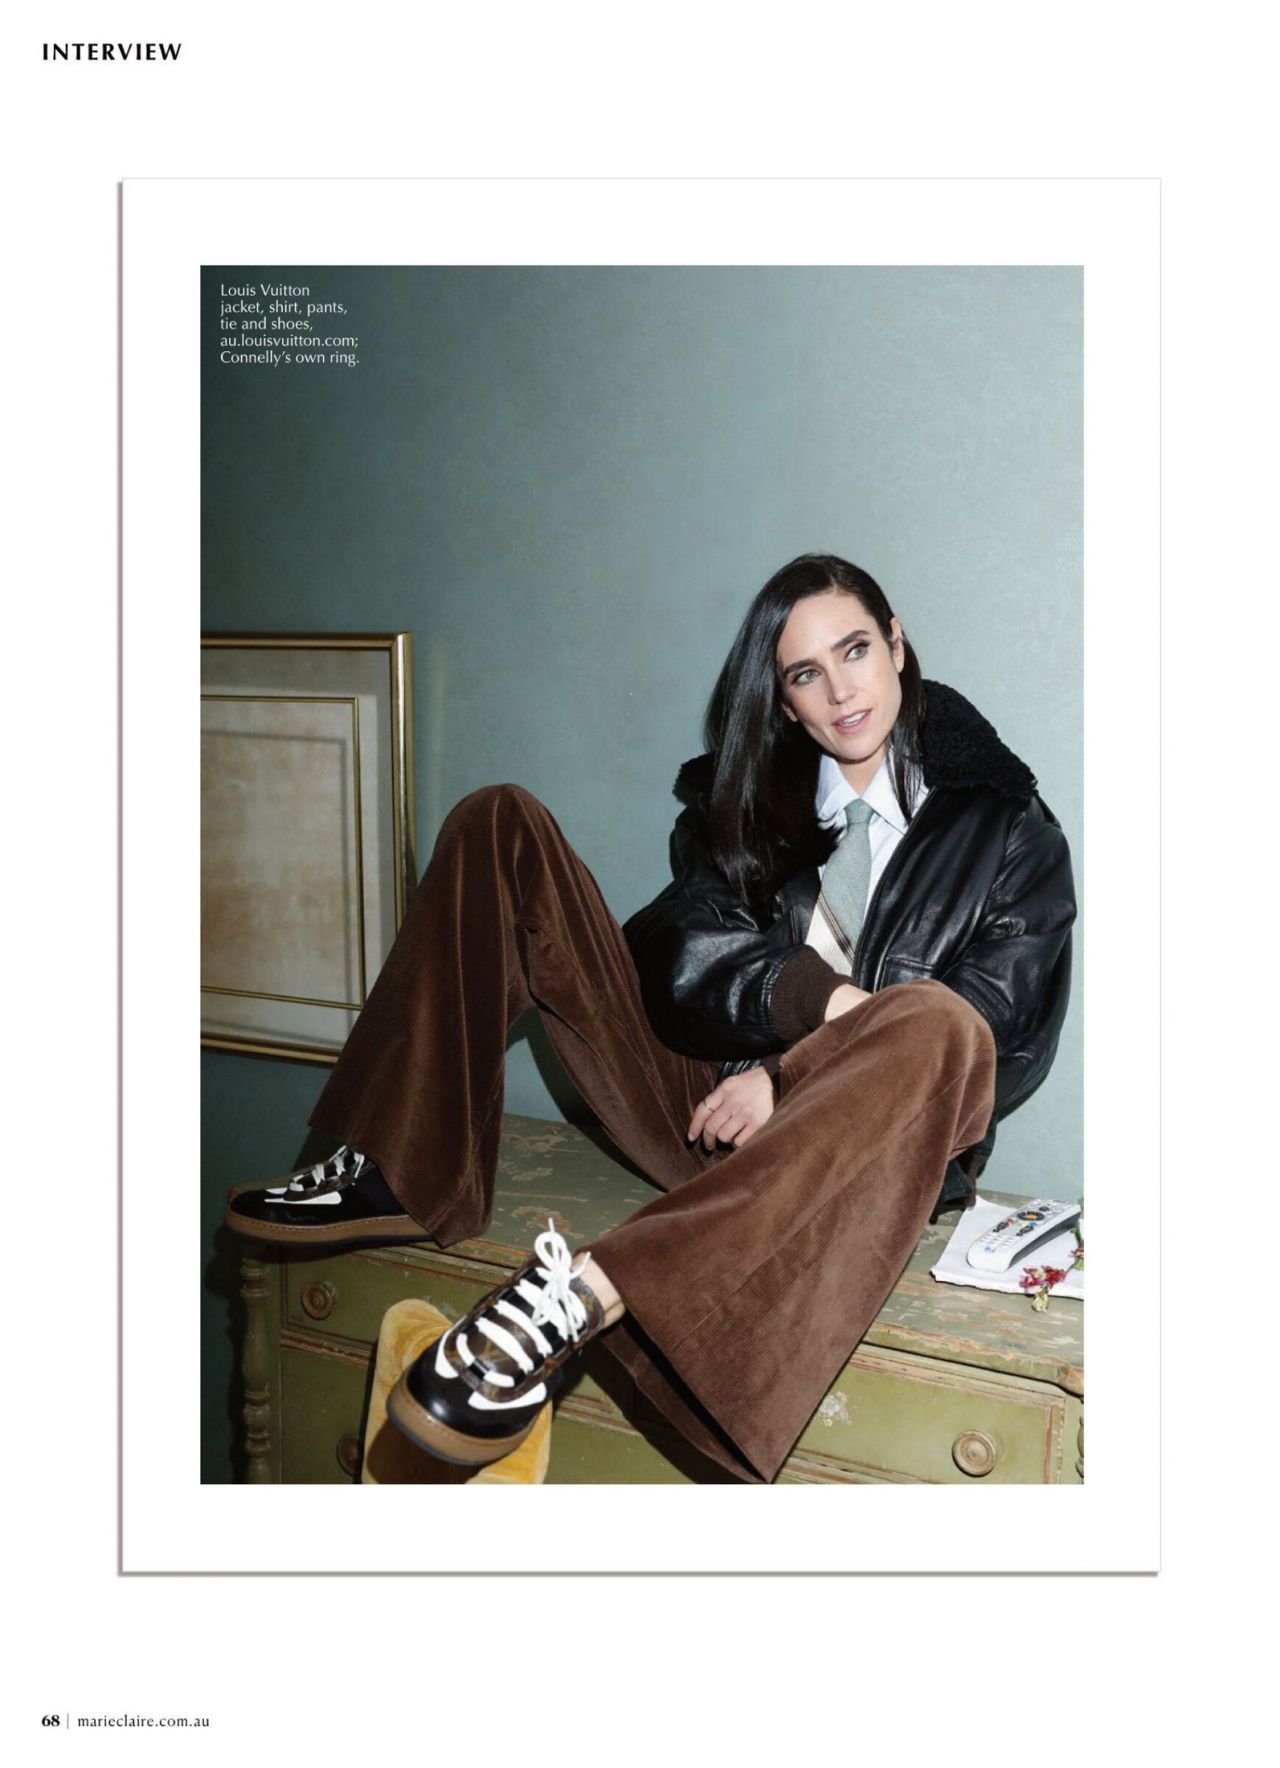 Jennifer Connelly - ELLE Italy 05/21/2022 Issue • CelebMafia